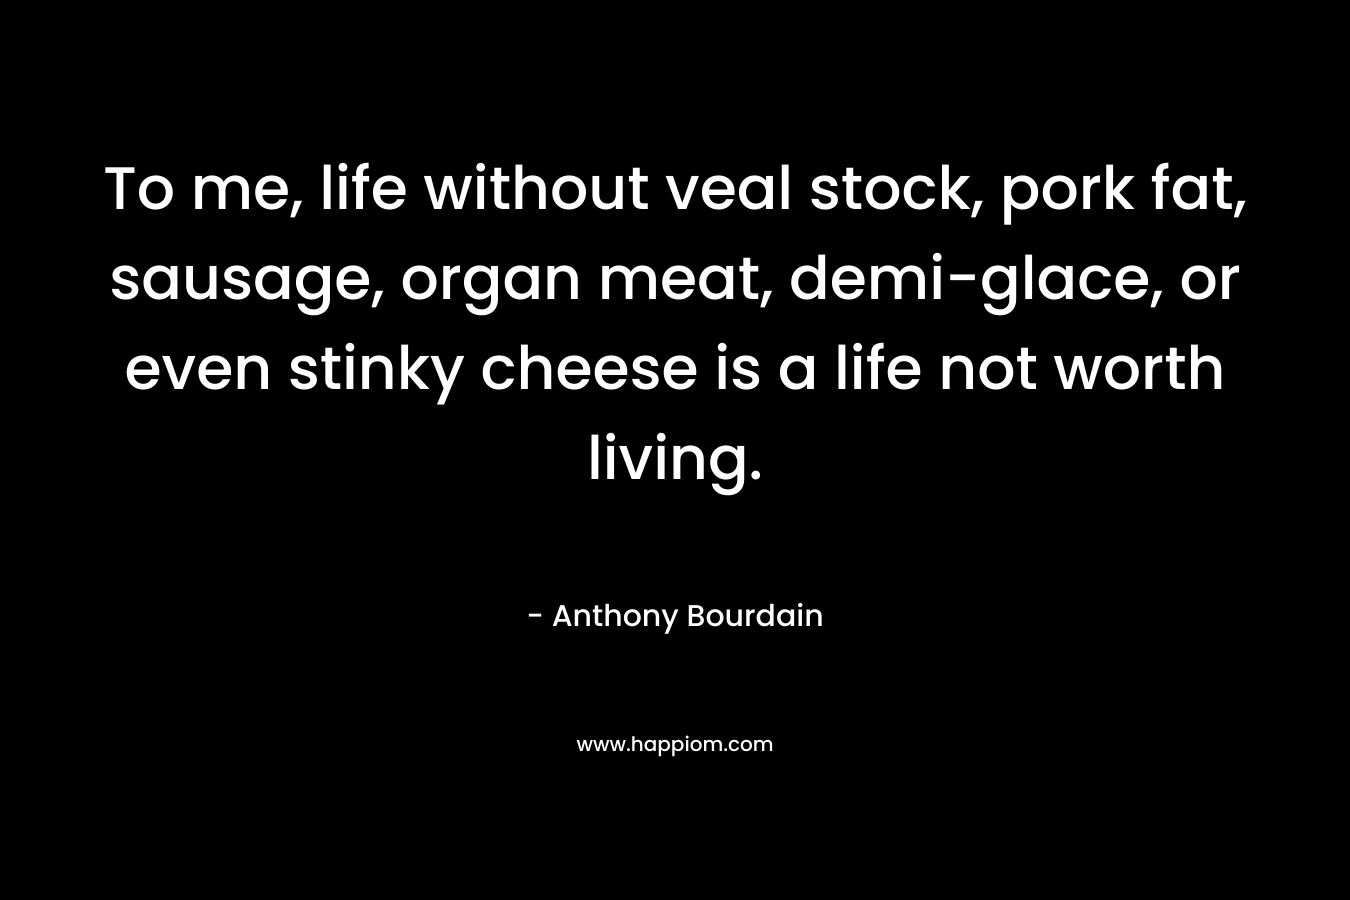 To me, life without veal stock, pork fat, sausage, organ meat, demi-glace, or even stinky cheese is a life not worth living. – Anthony Bourdain